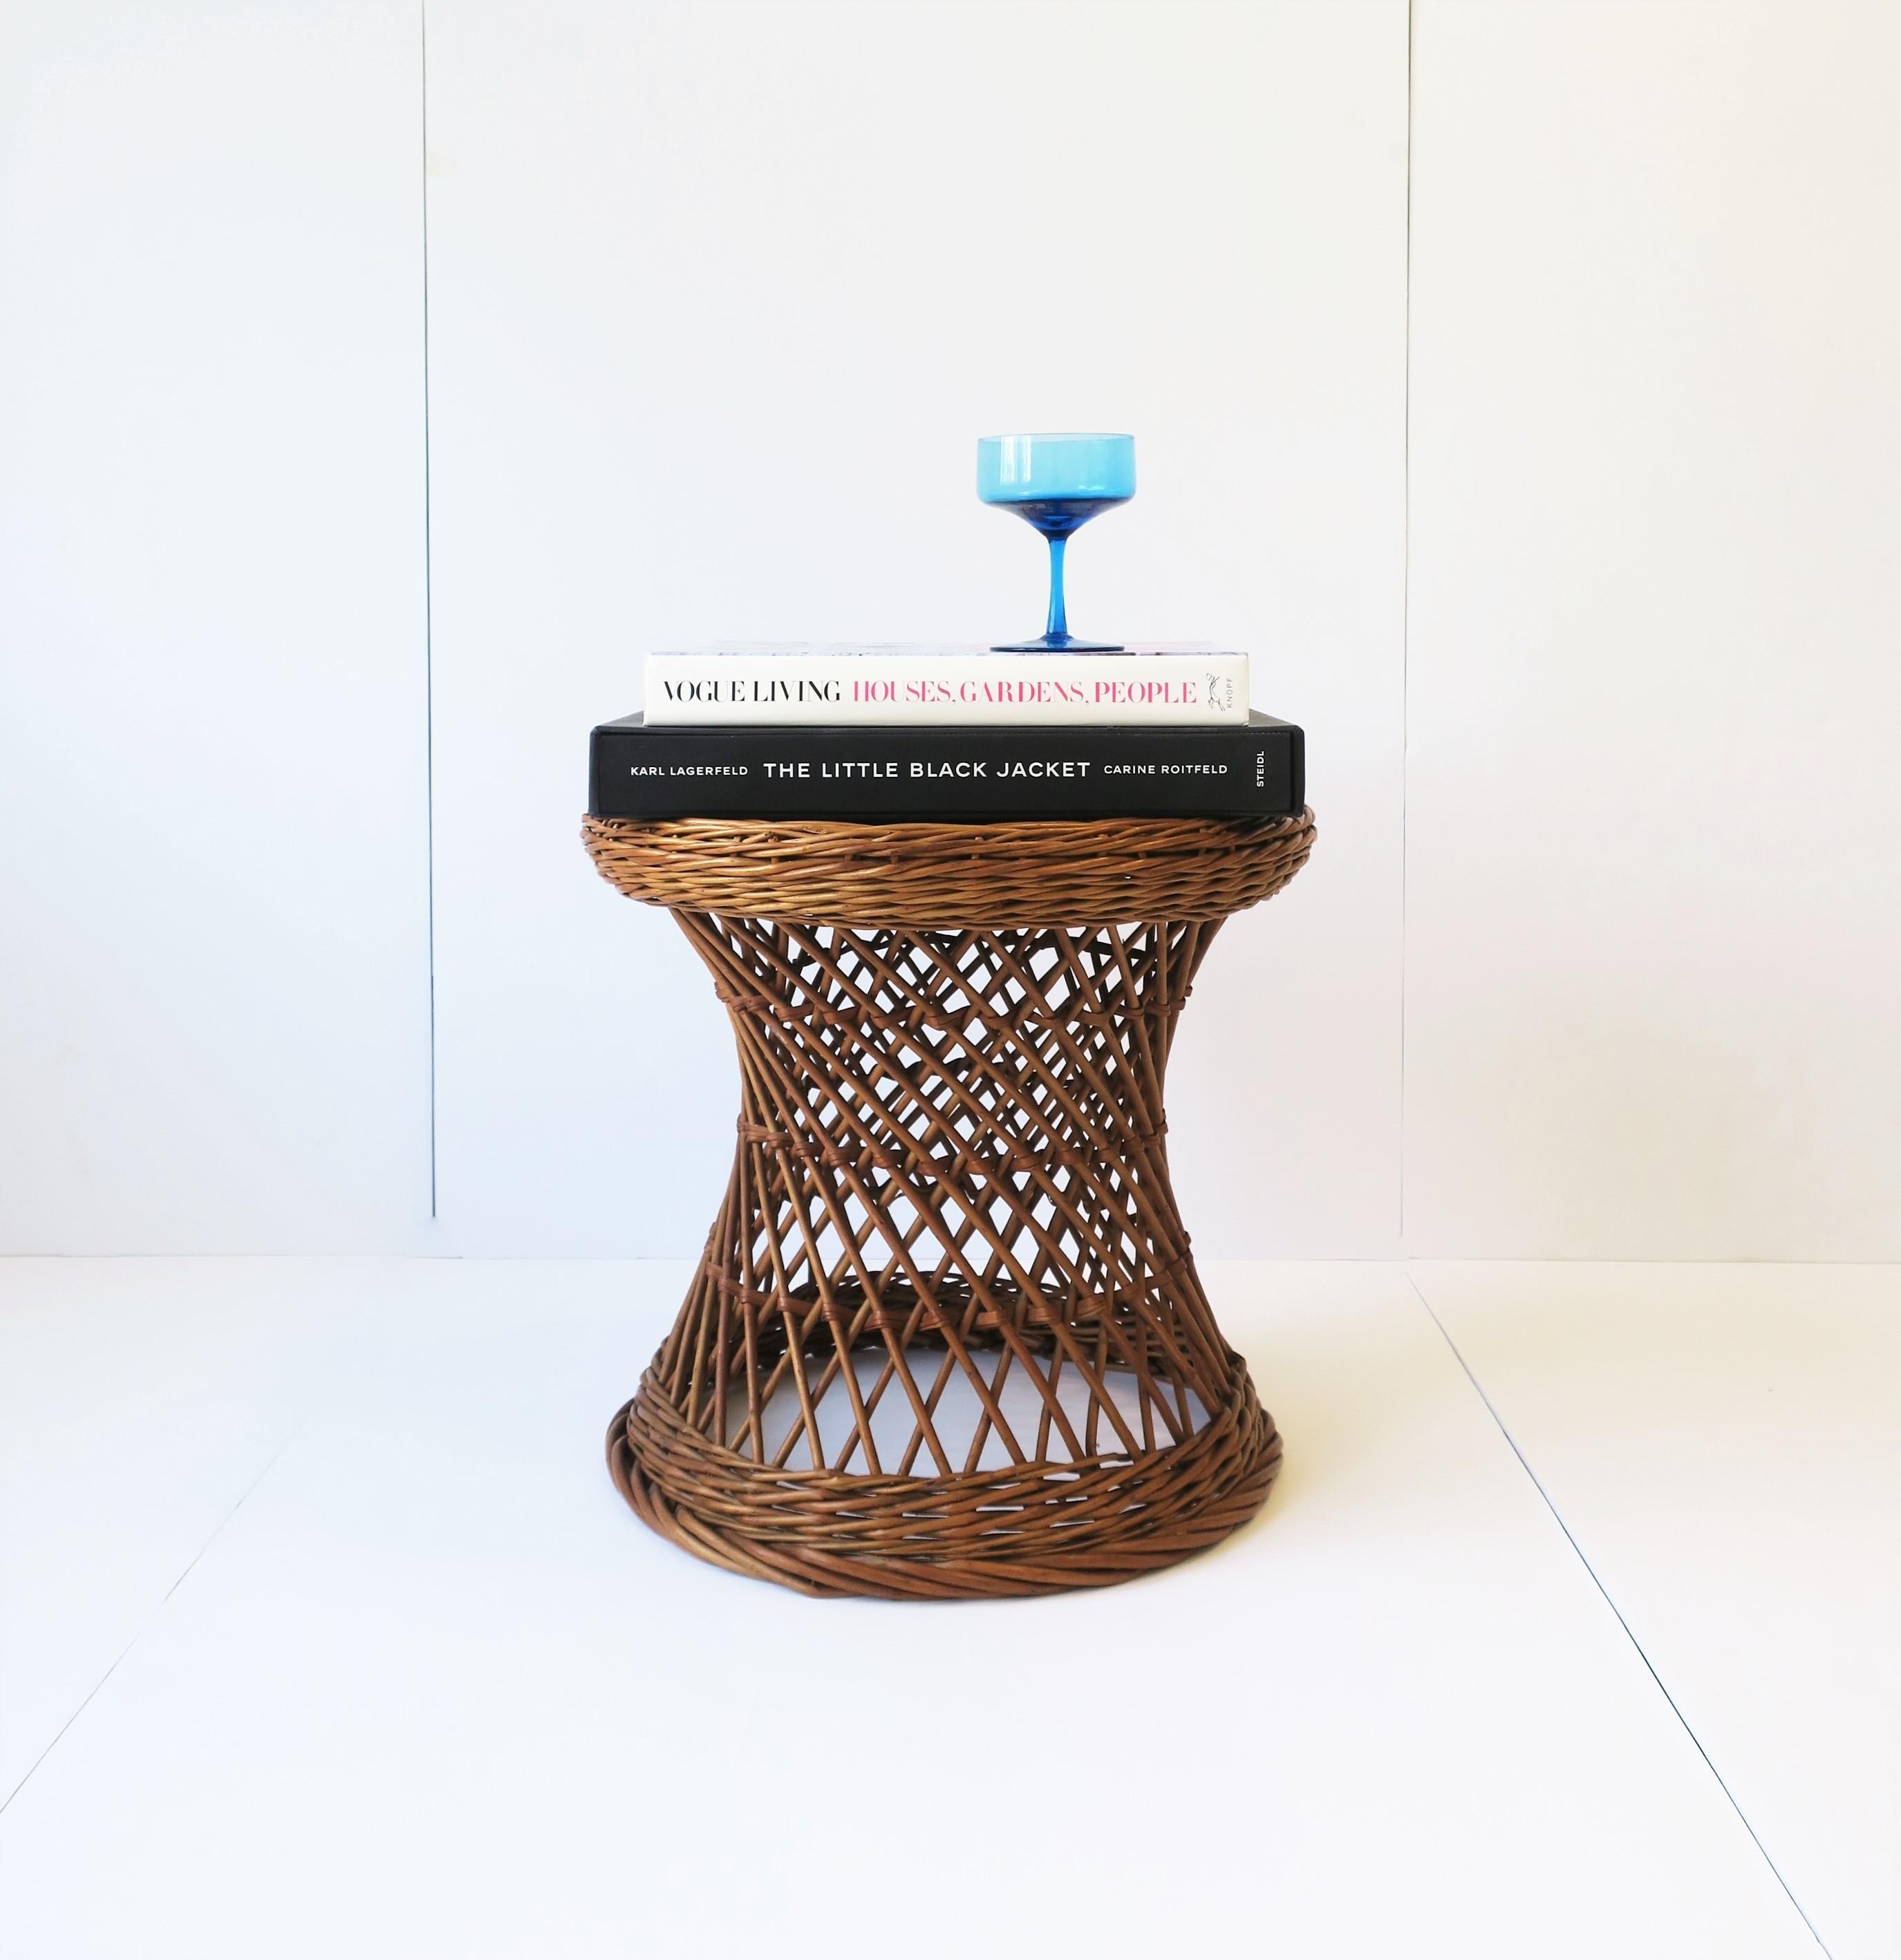 A vintage Midcentury European wicker stool or side table with hourglass design. Marked 'made in Yugoslavia' as shown in image #14. Piece can be used as a side table (as demonstrated in images) or stool. Dimensions: 17